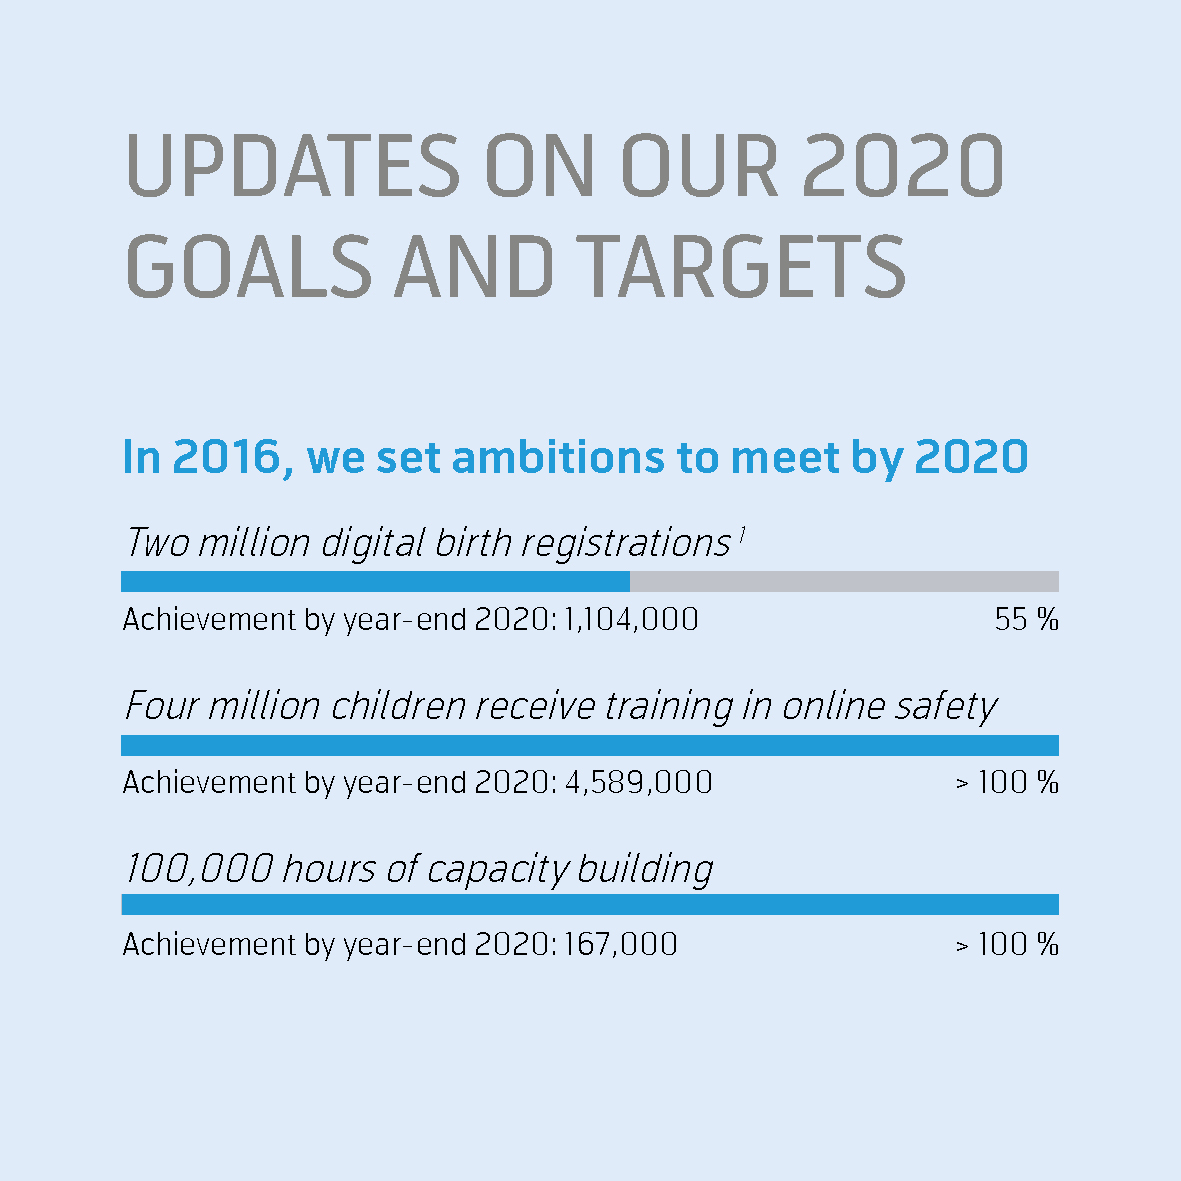 Illustration - update on our 2020 goals and targets